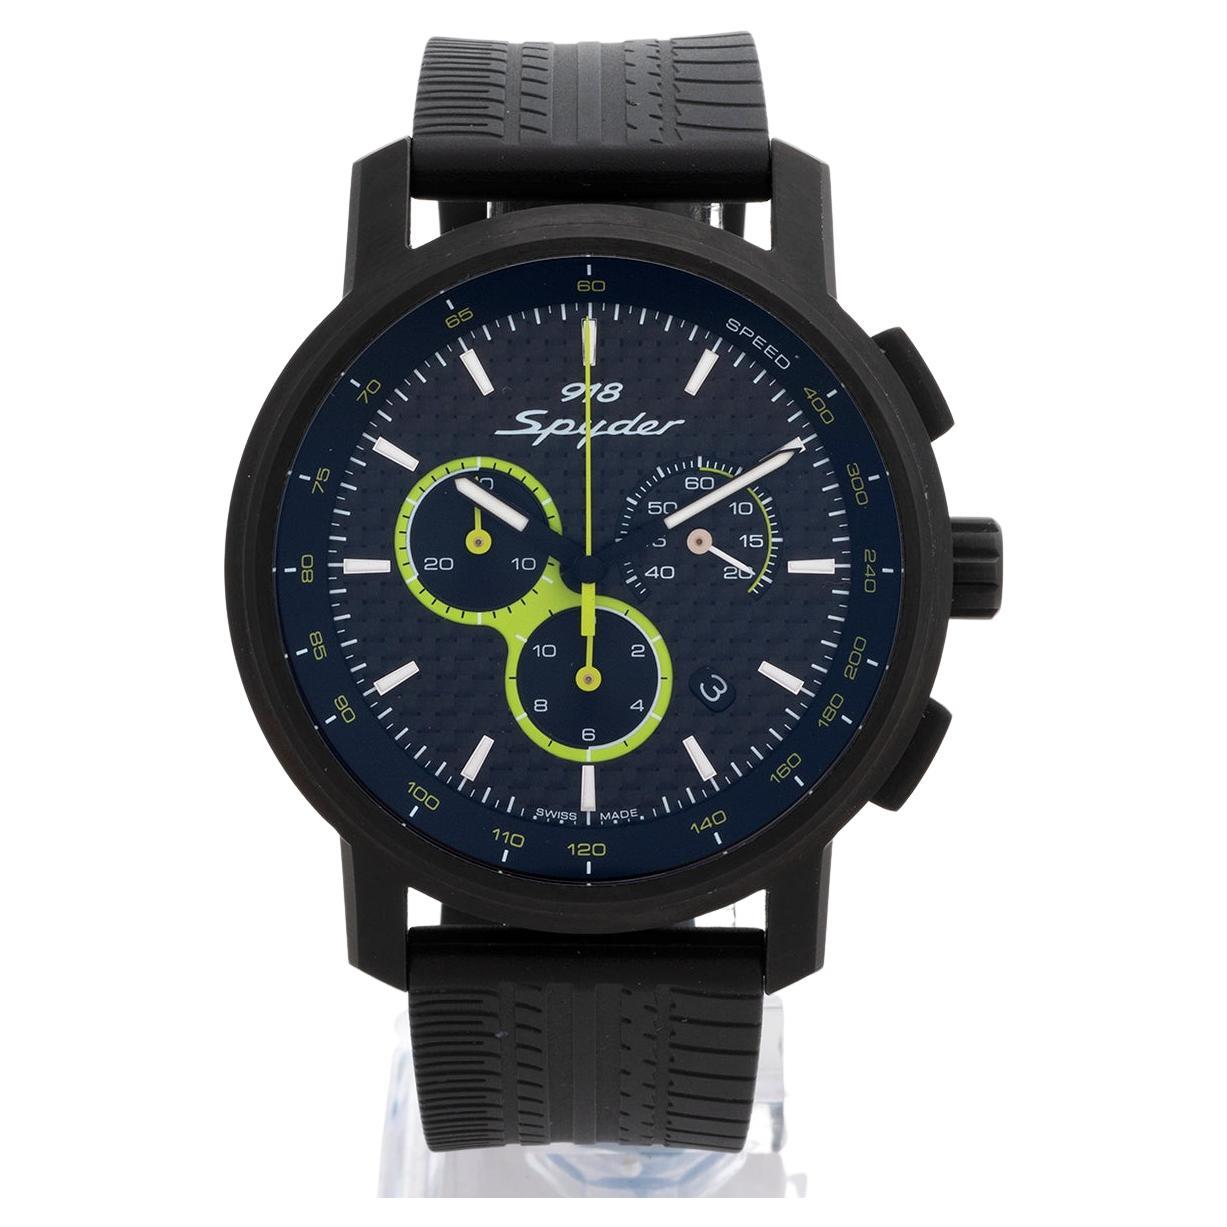 Our Porsche Design 918 Spyder quartz chronograph reference wap0700810e features a black steel 44mm case, and carbon effect dial with rubber tyre effect strap and folding clasp with security lock. The dial has acid green touches to the sub dil and